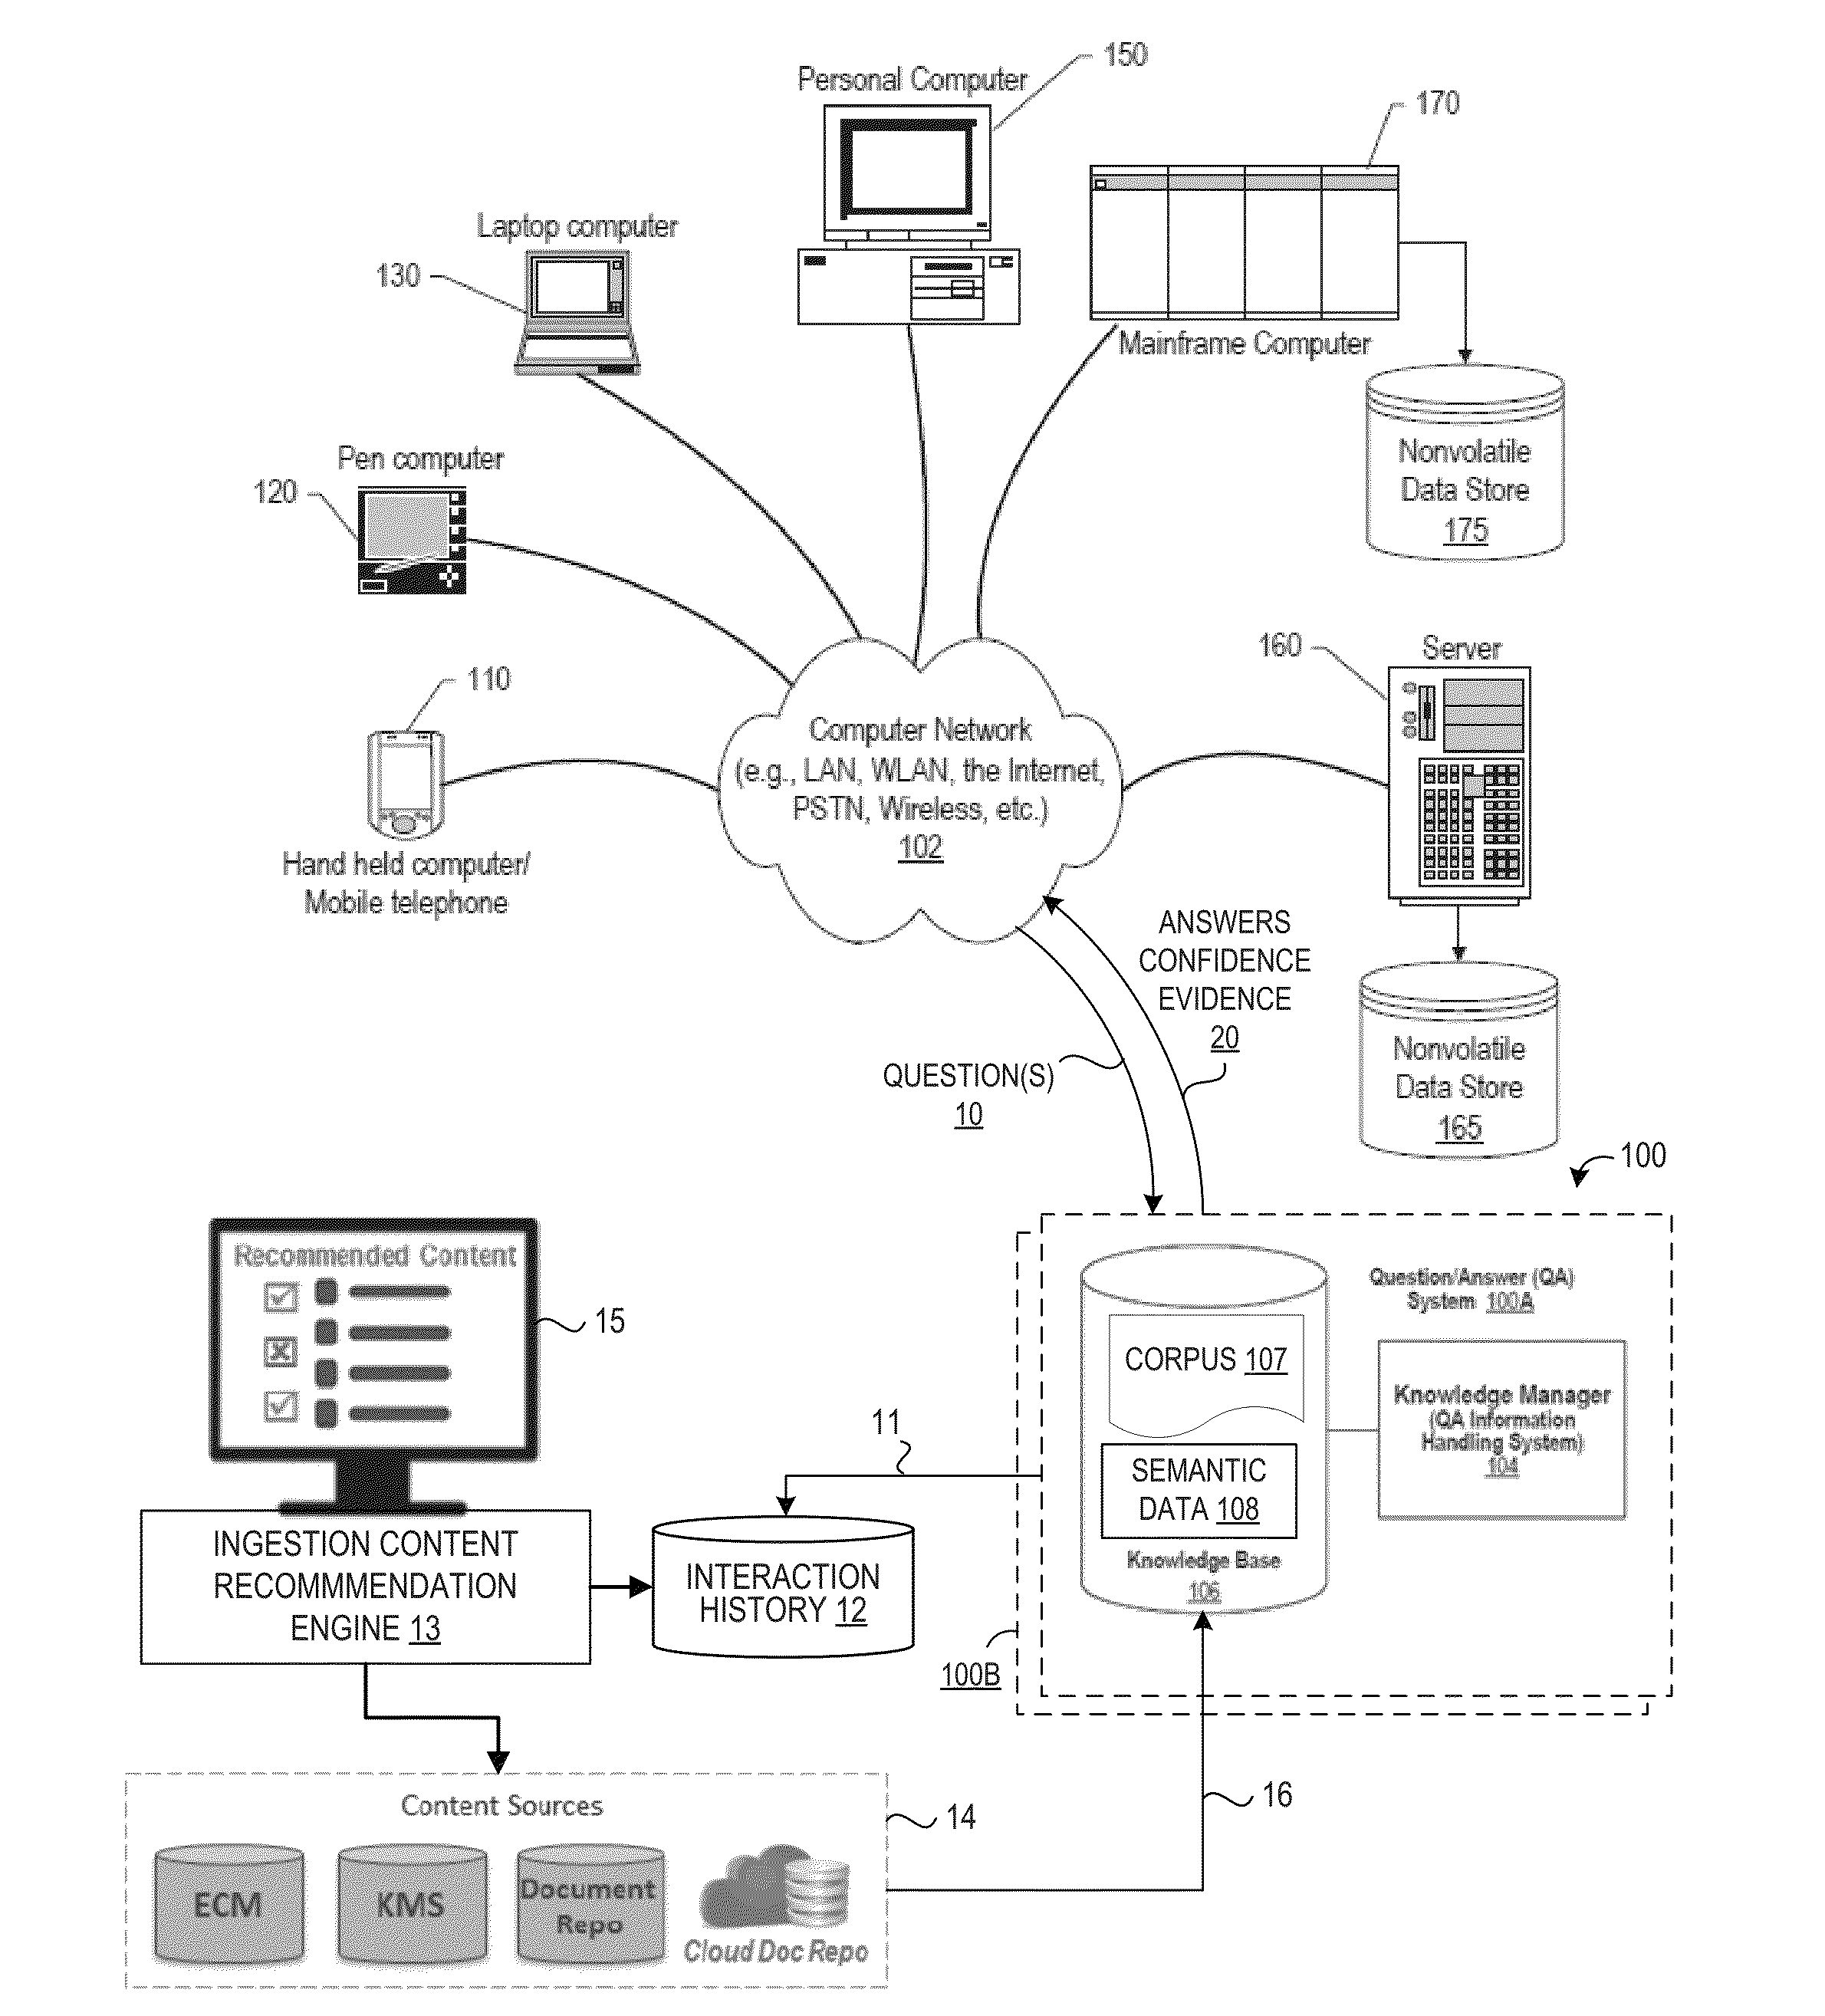 Method For Recommending Content To Ingest As Corpora Based On Interaction History In Natural Language Question And Answering Systems